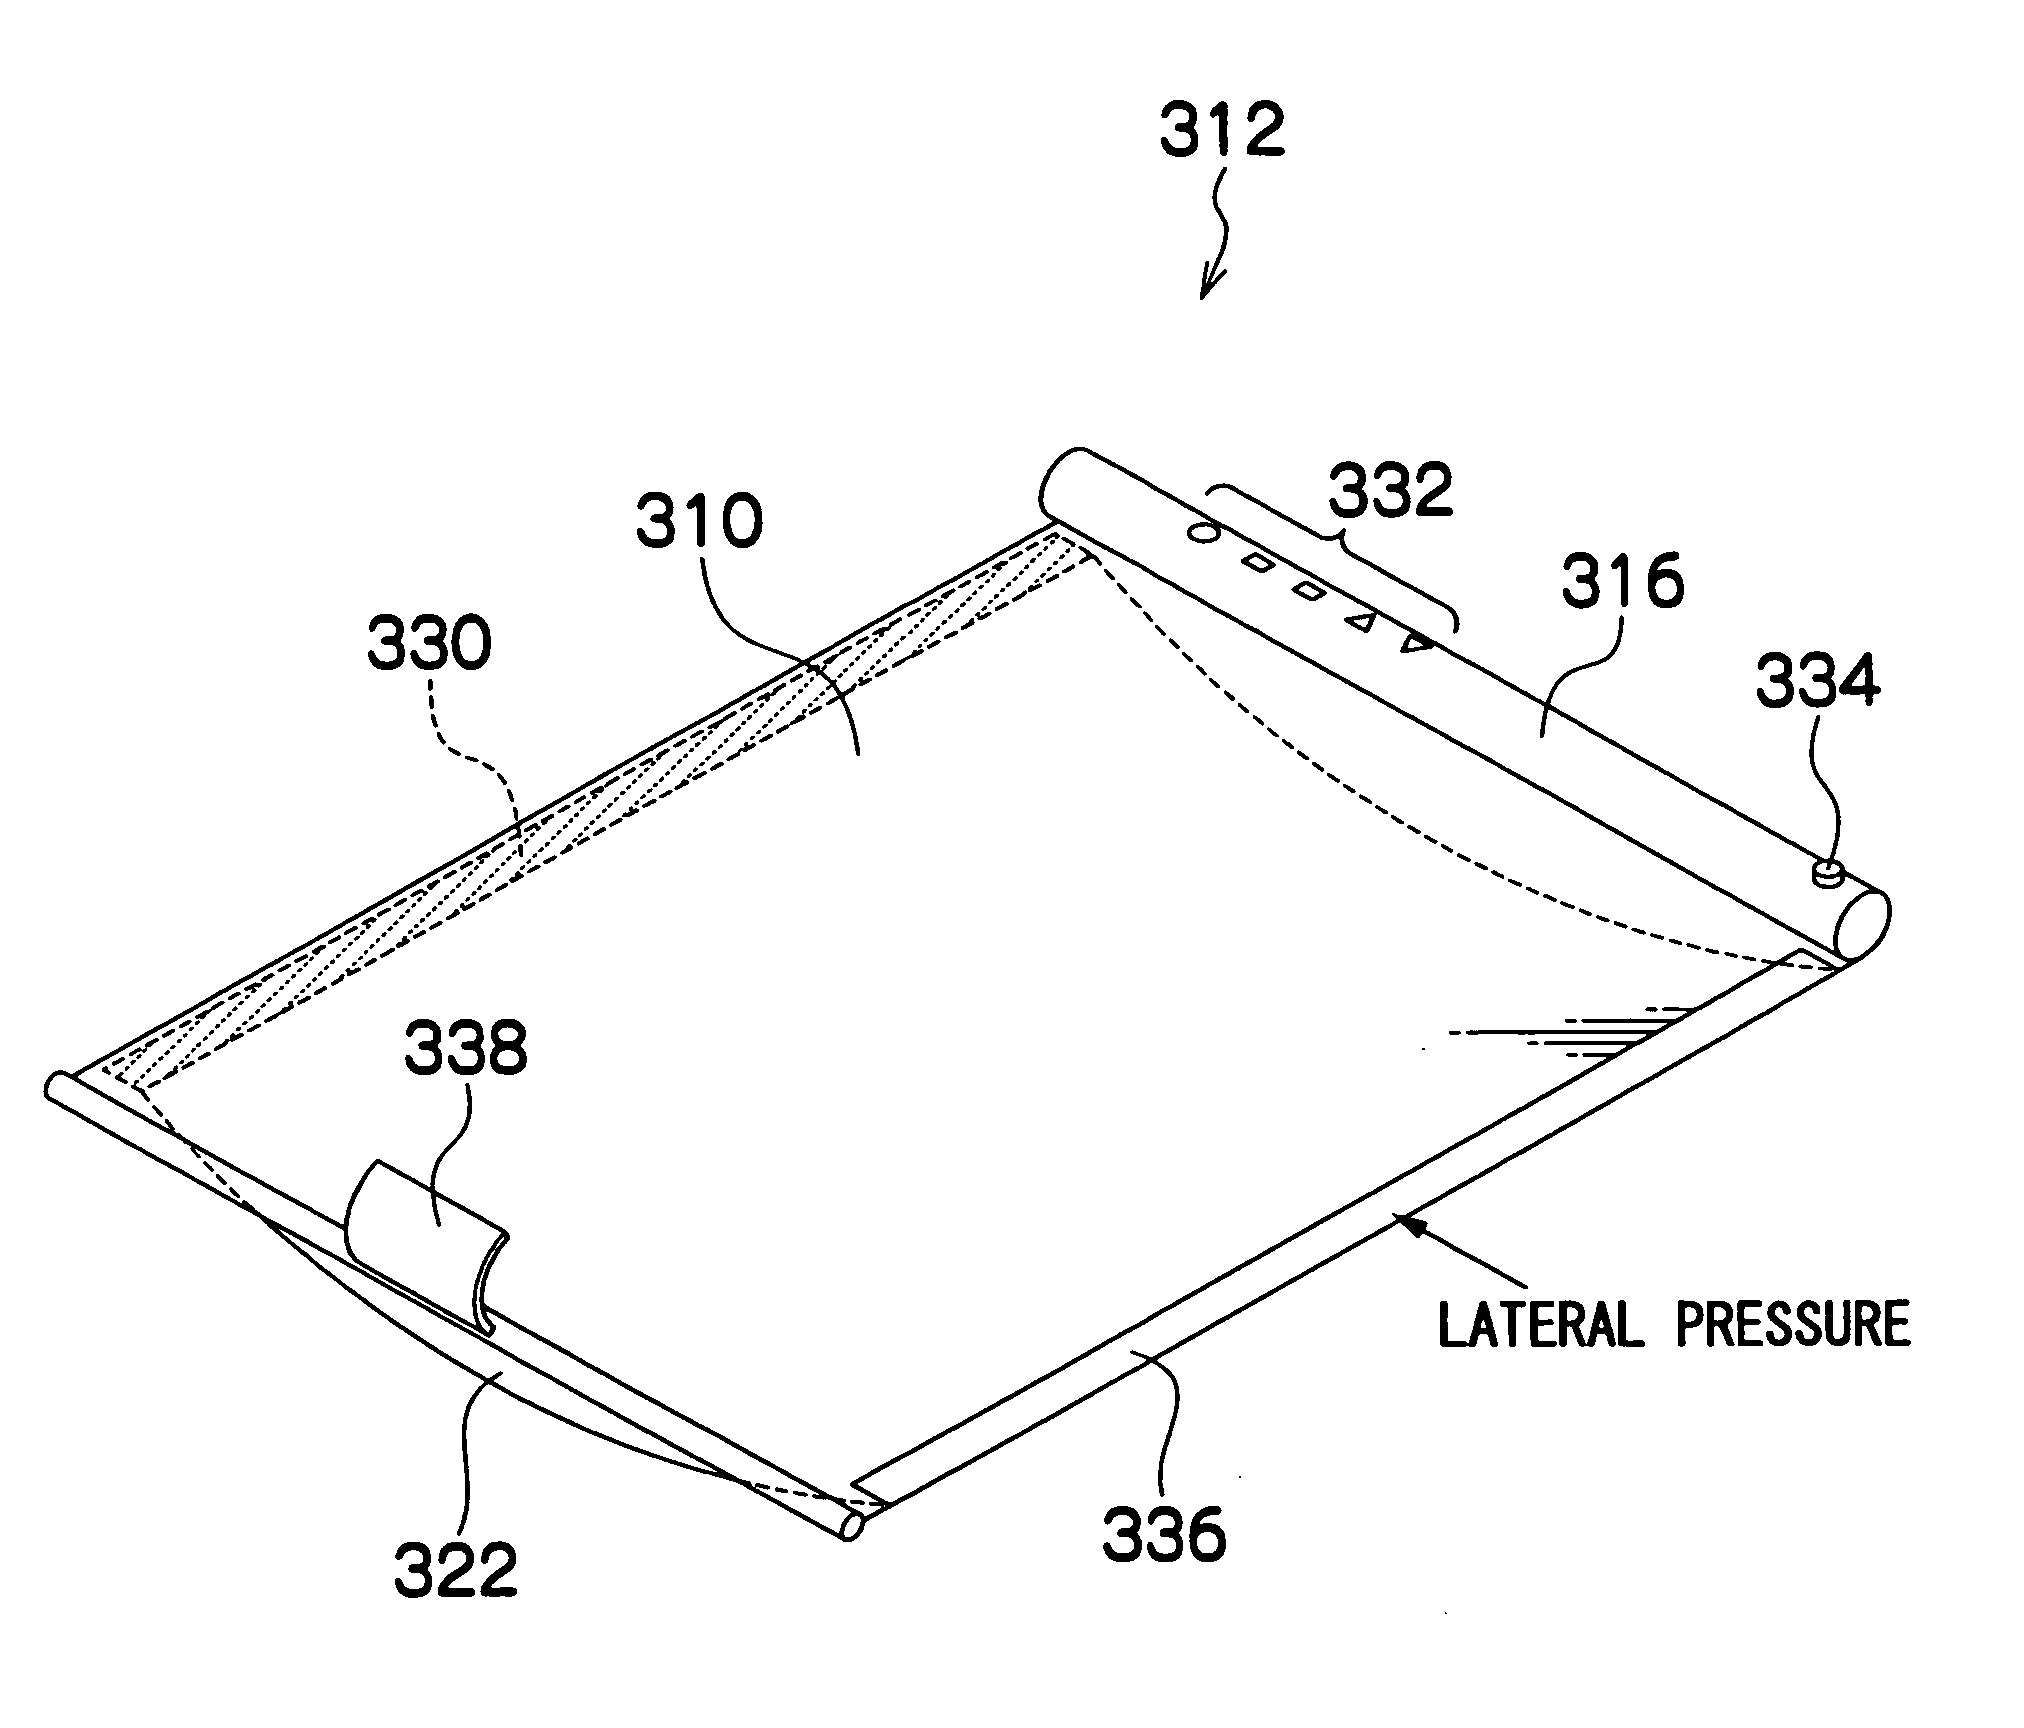 Display element, portable equipment and imaging device